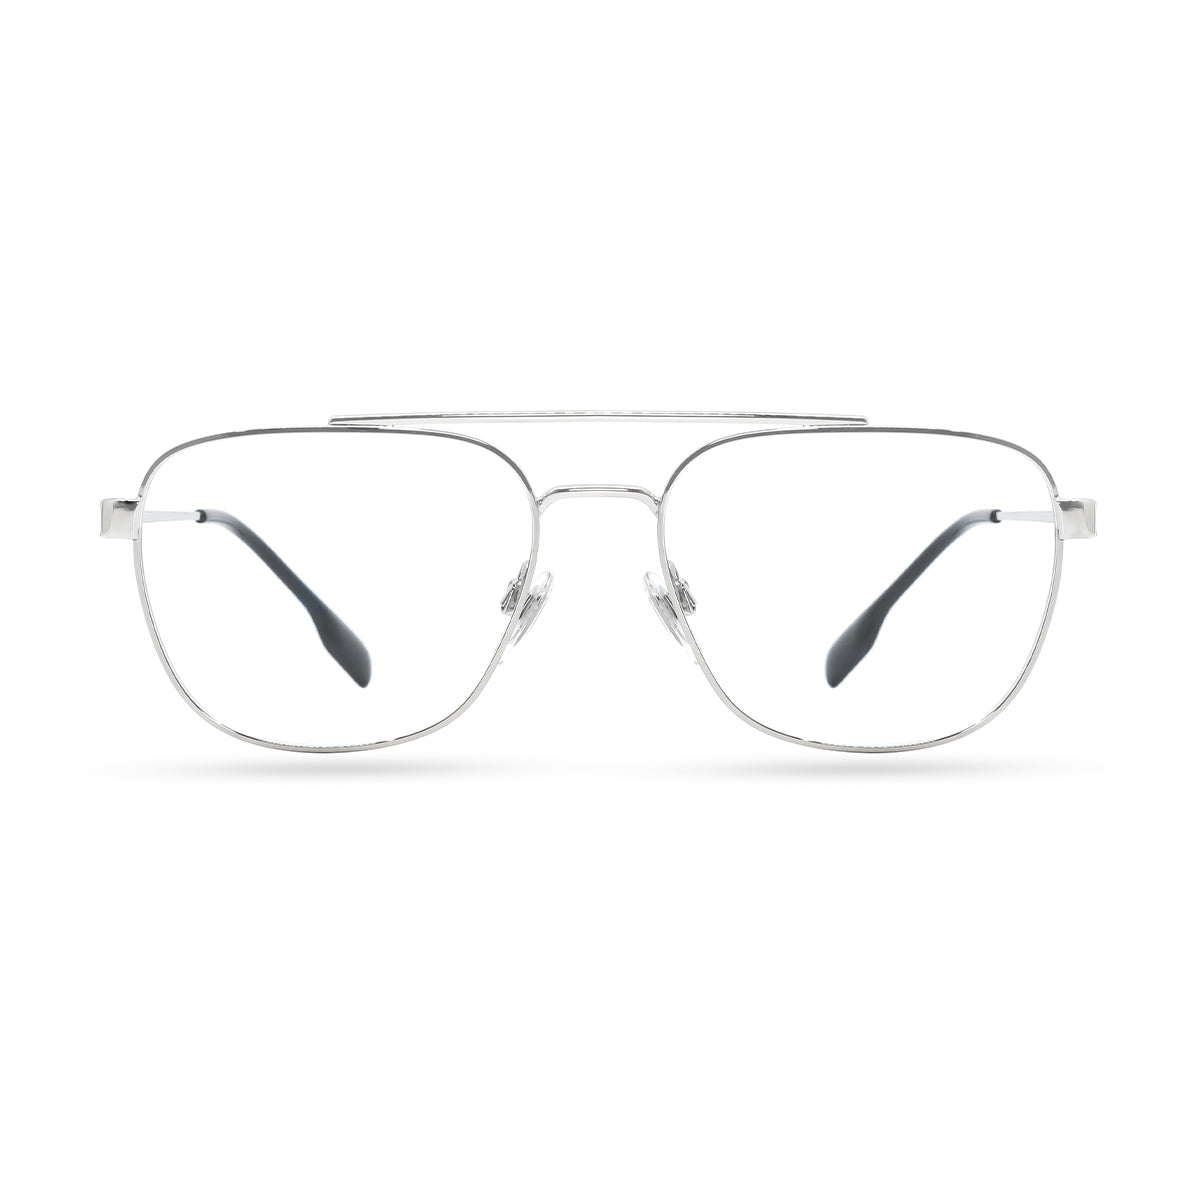 BURBERRY B 1377 1005 spectacle-frame